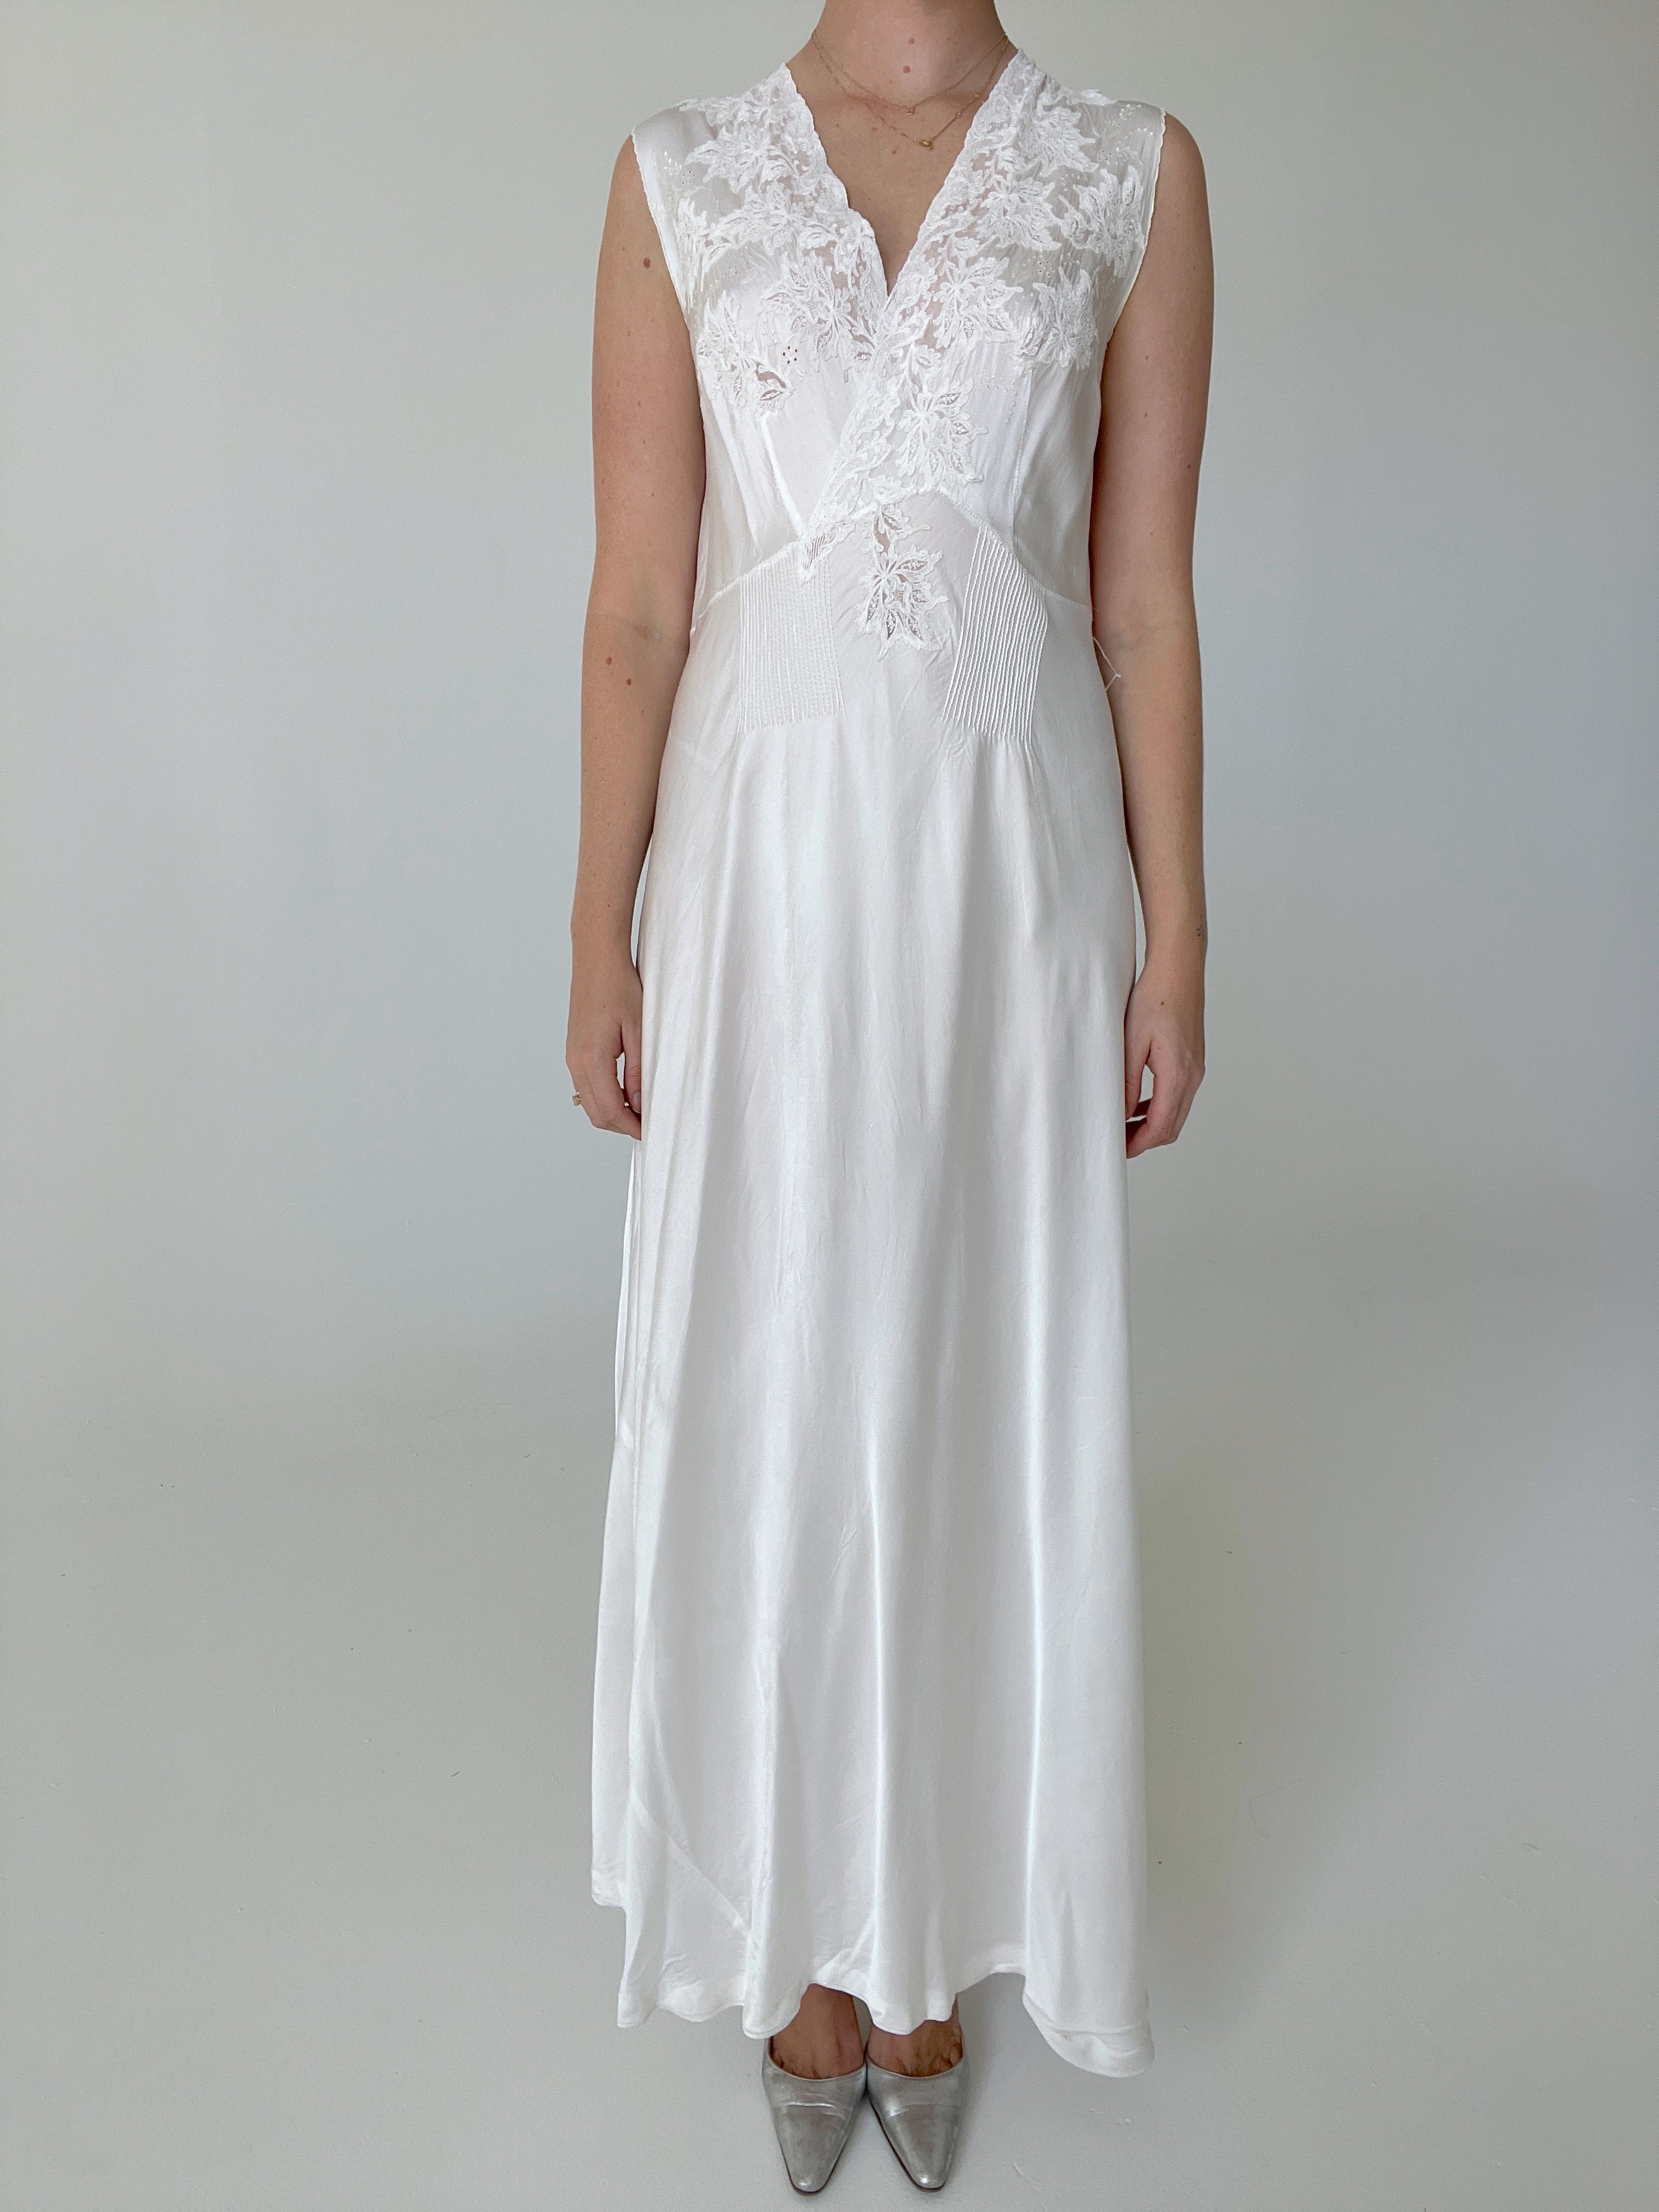 1940's Bridal White Silk Dress with Lace